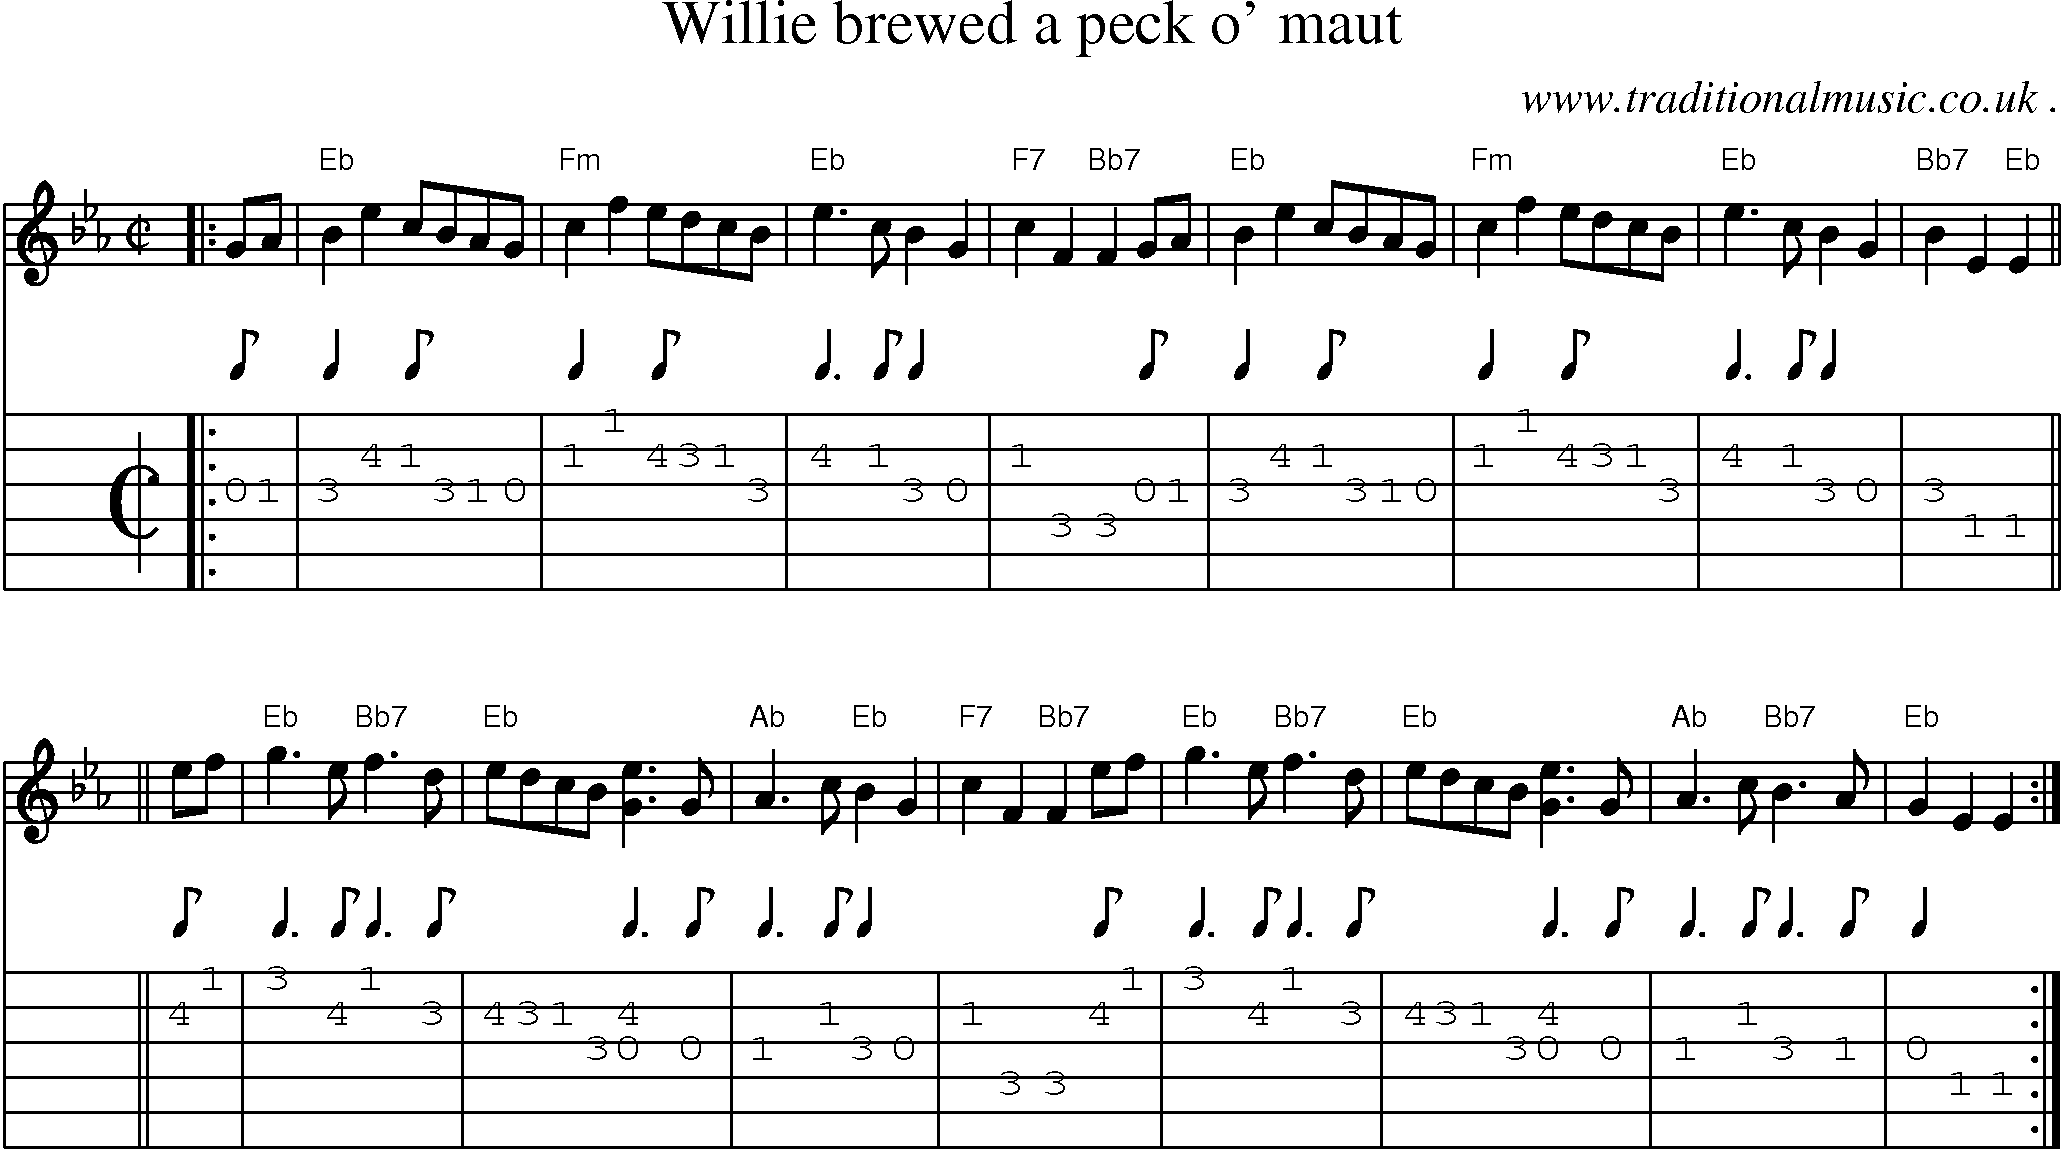 Sheet-music  score, Chords and Guitar Tabs for Willie Brewed A Peck O Maut